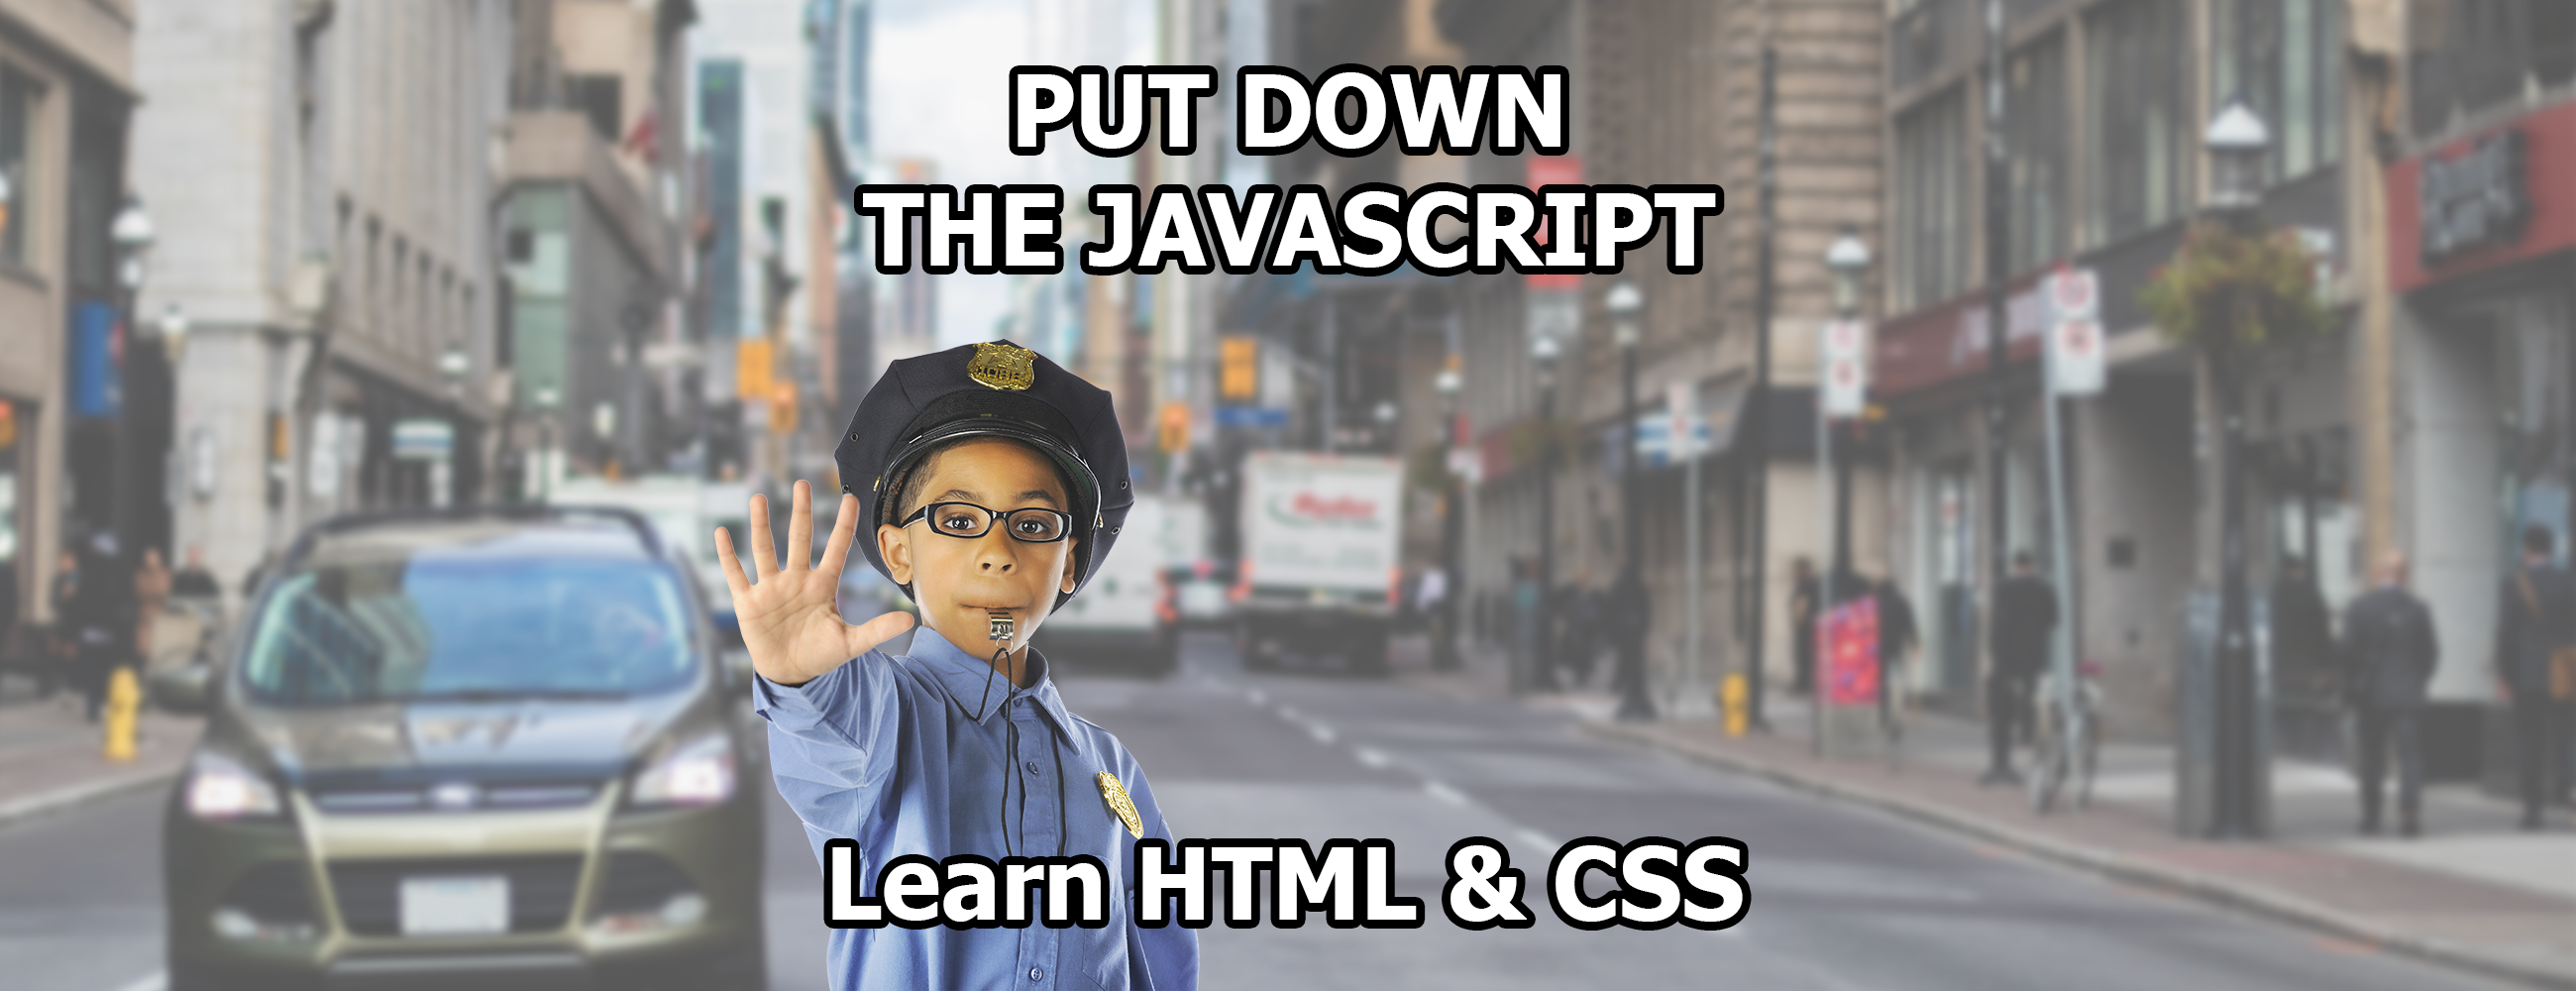 Put Down the Javascript: Learn HTML & CSS first